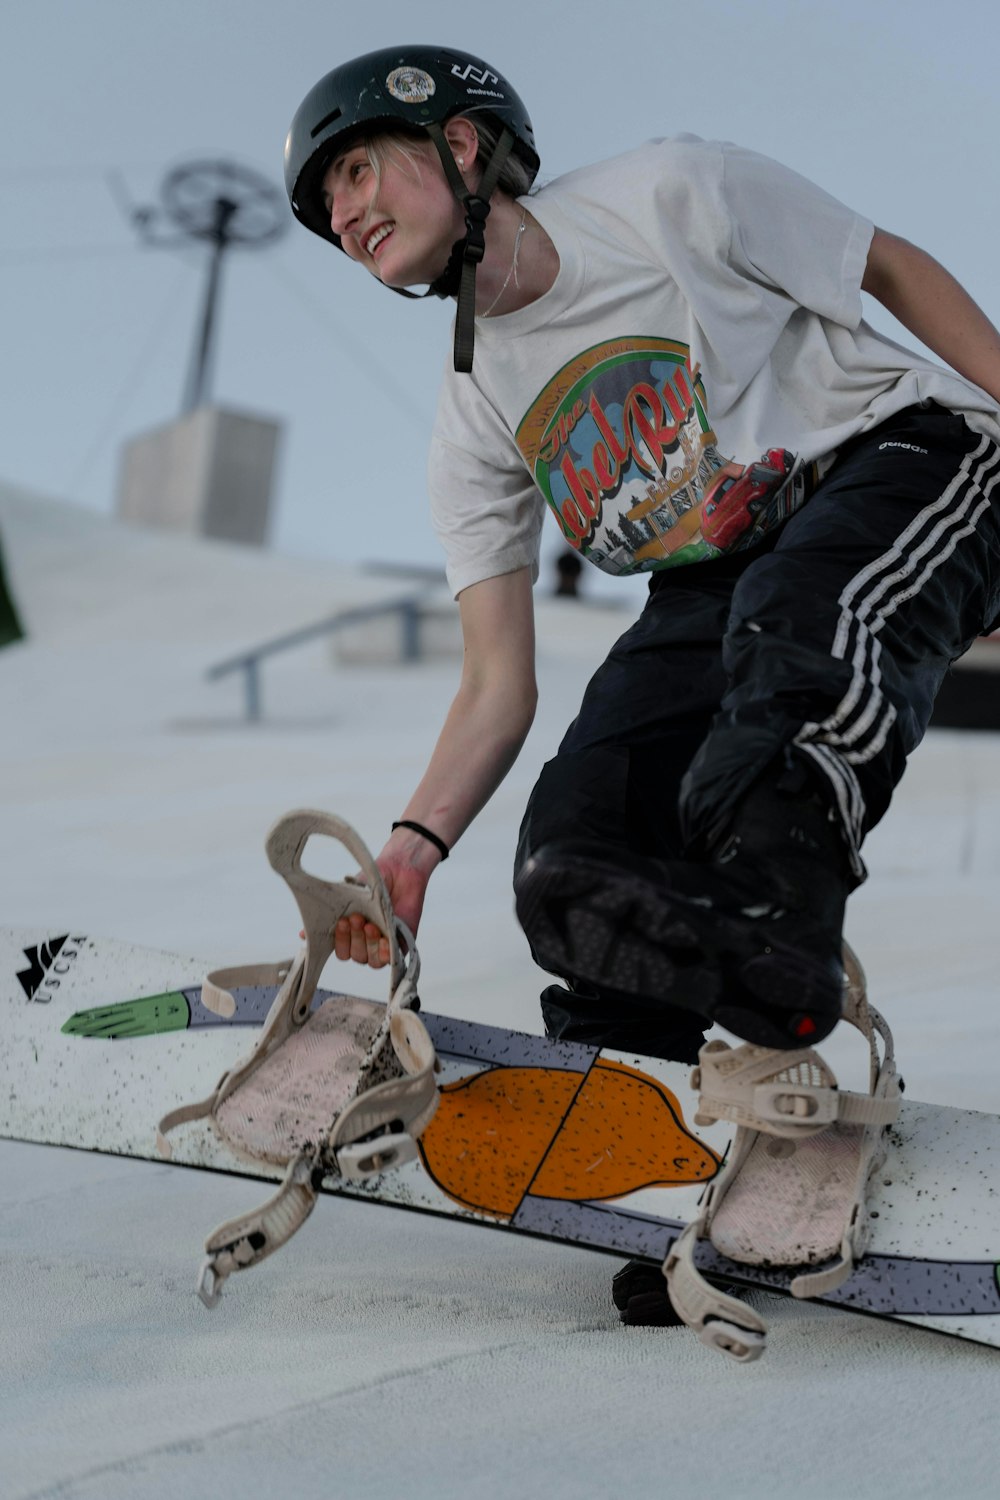 a young man riding a snowboard on top of a ramp